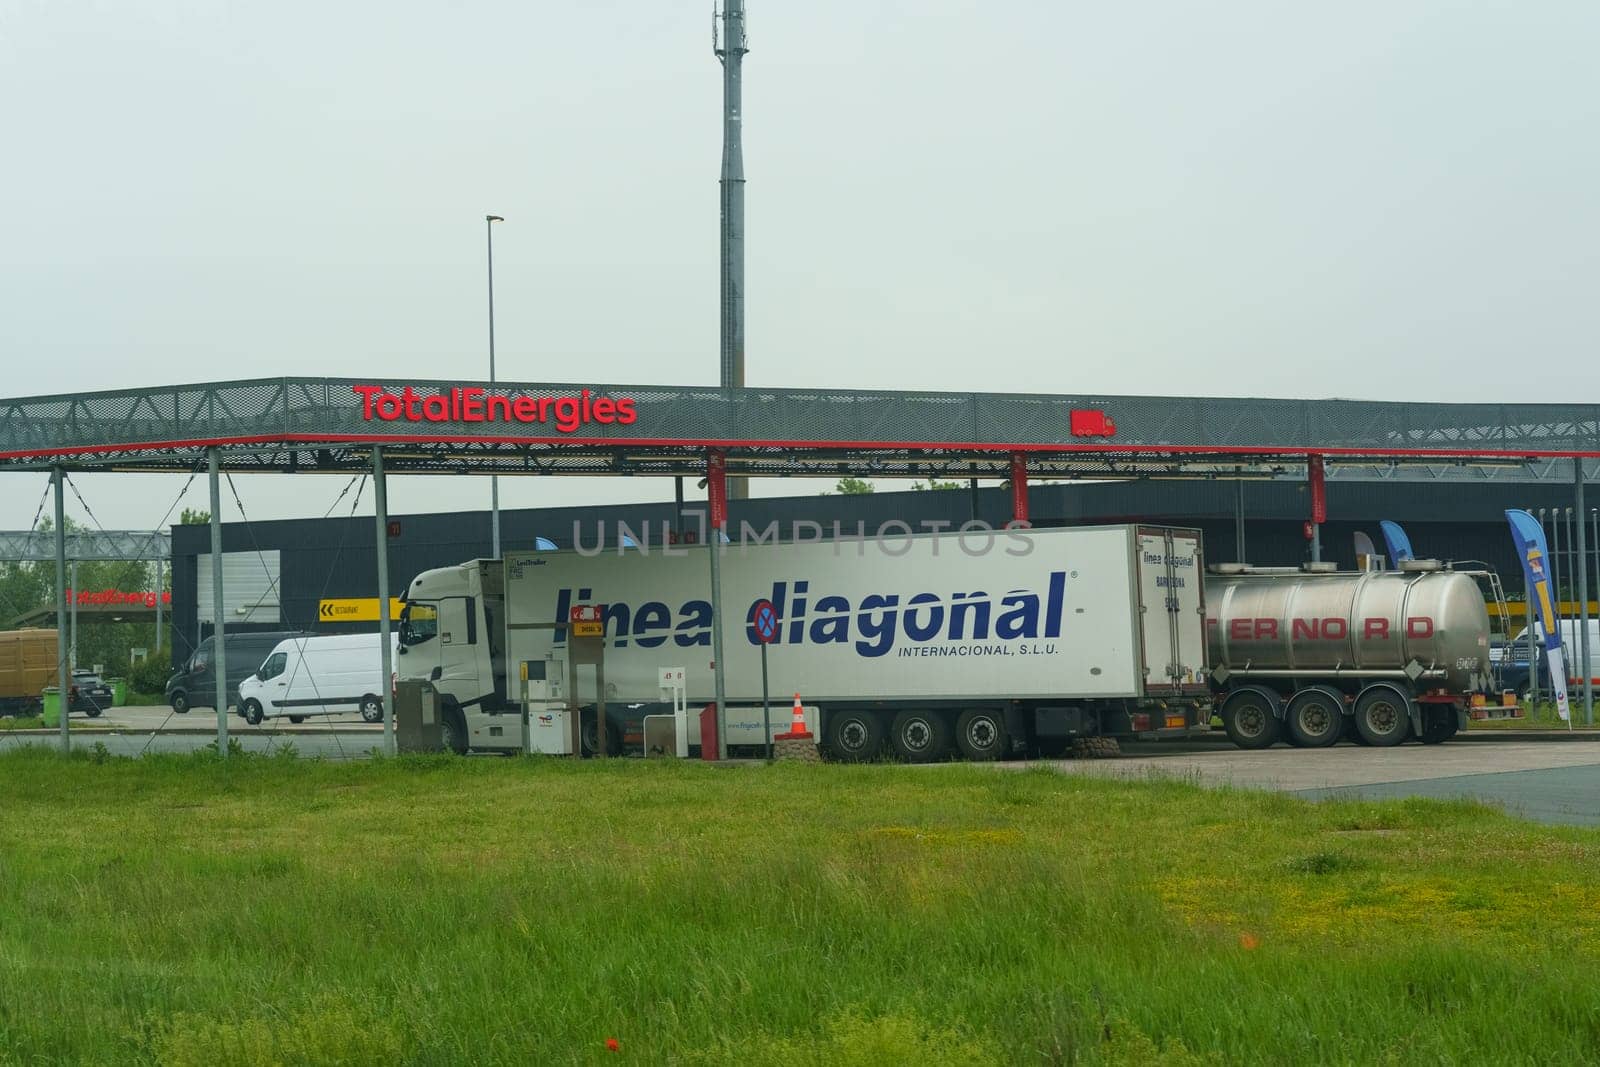 Waregem, Belgium - May 22, 2023: A commercial truck parked in front of a gas station, with a fuel pump nearby and signage for services offered.